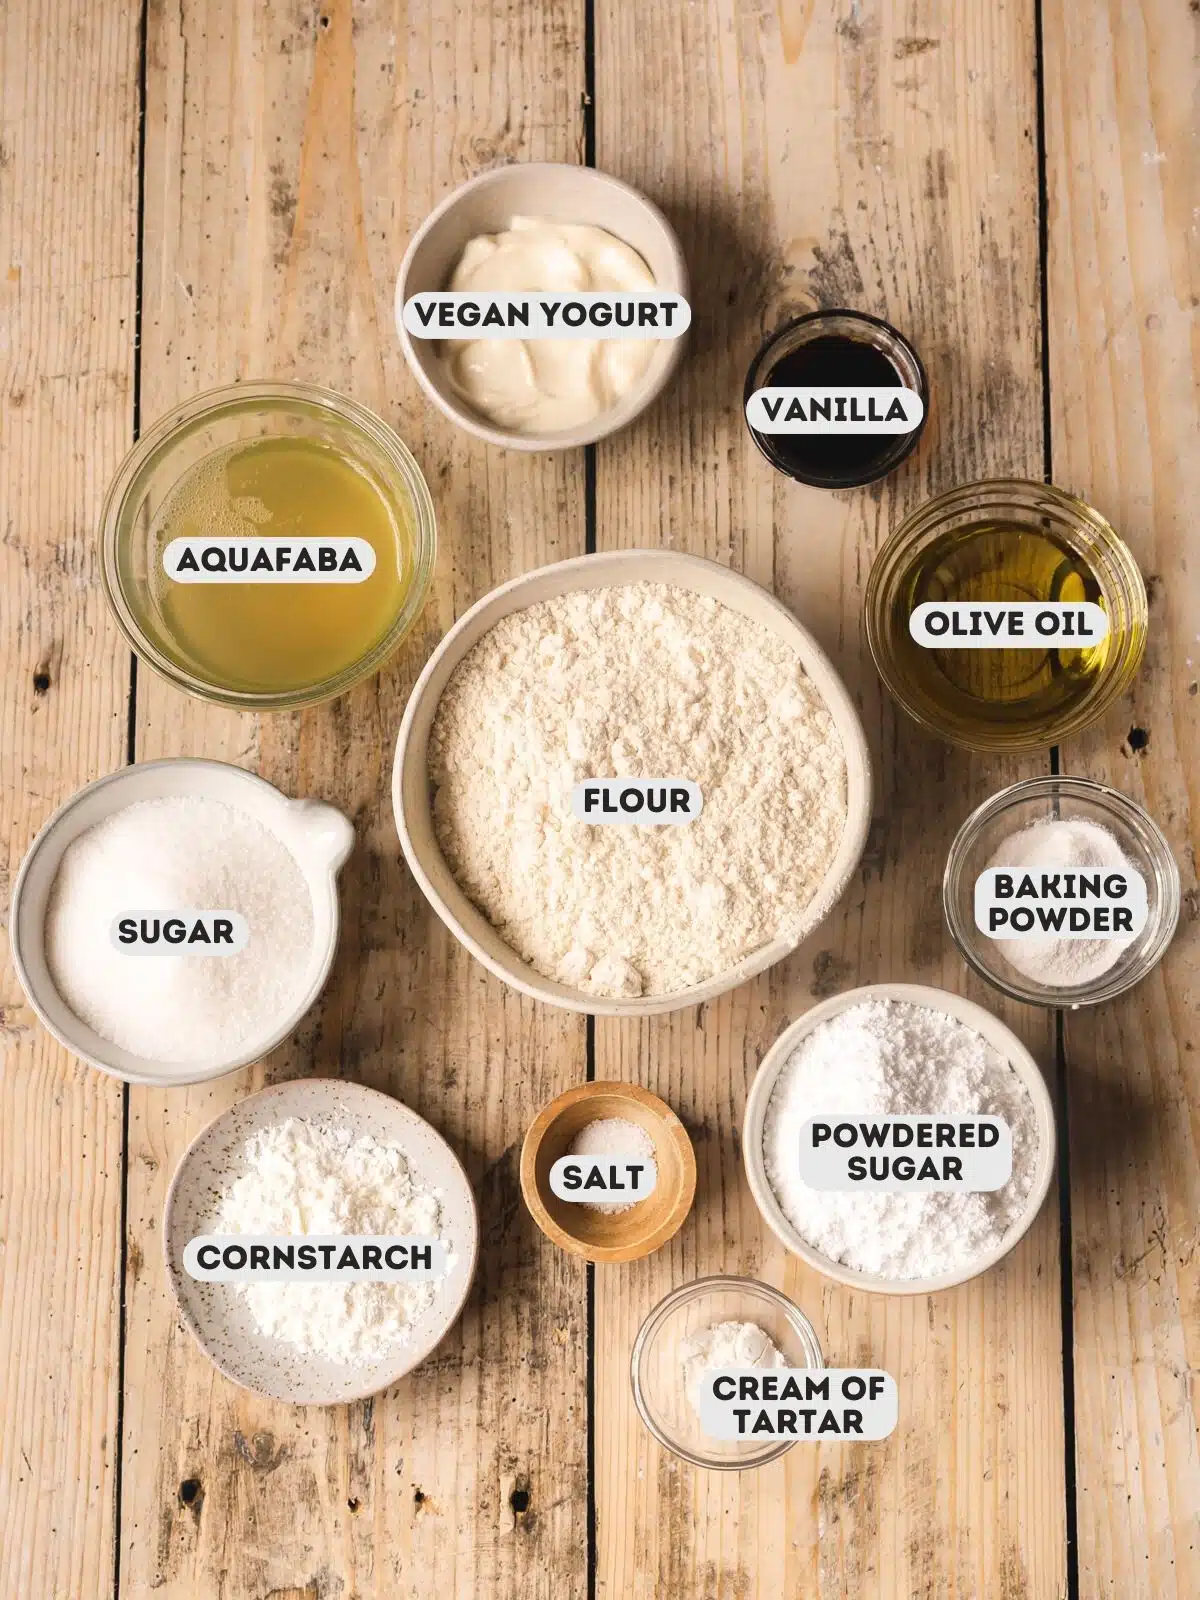 ingredients for homemade vegan savoiardi measured out in bowls on a wooden surface.